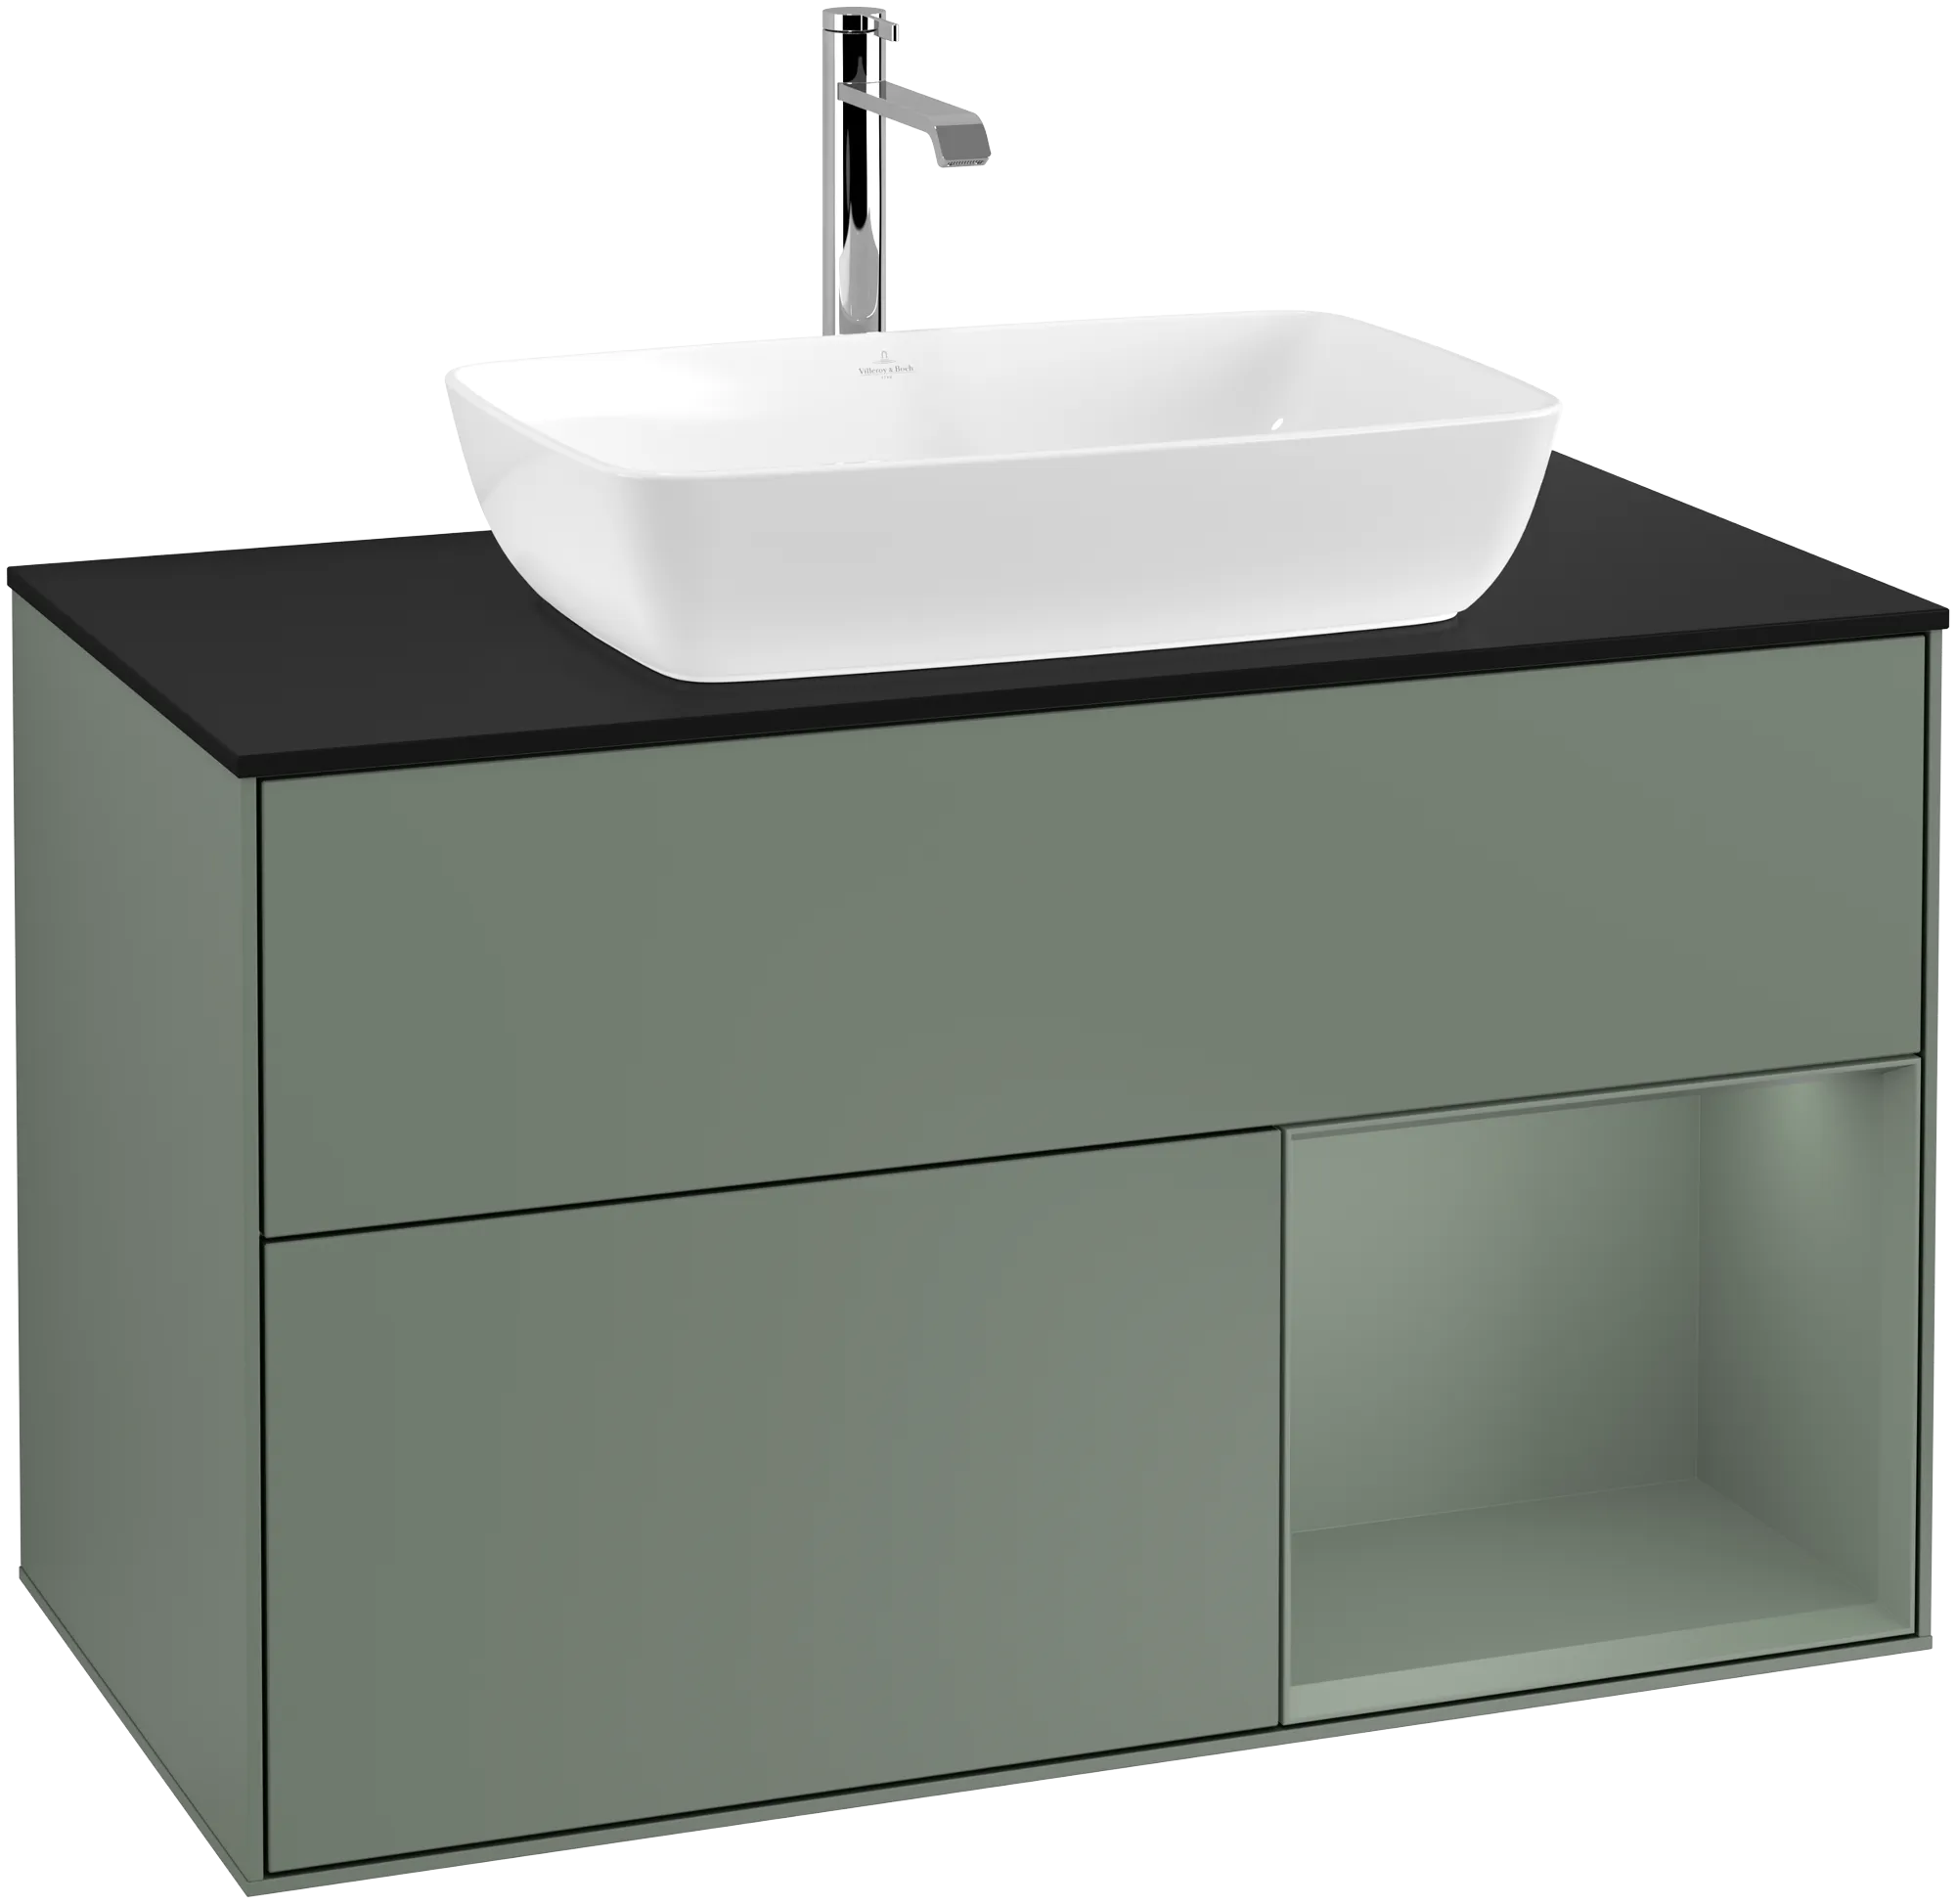 VILLEROY BOCH Finion Vanity unit, with lighting, 2 pull-out compartments, 1000 x 603 x 501 mm, Olive Matt Lacquer / Olive Matt Lacquer / Glass Black Matt #G782GMGM resmi